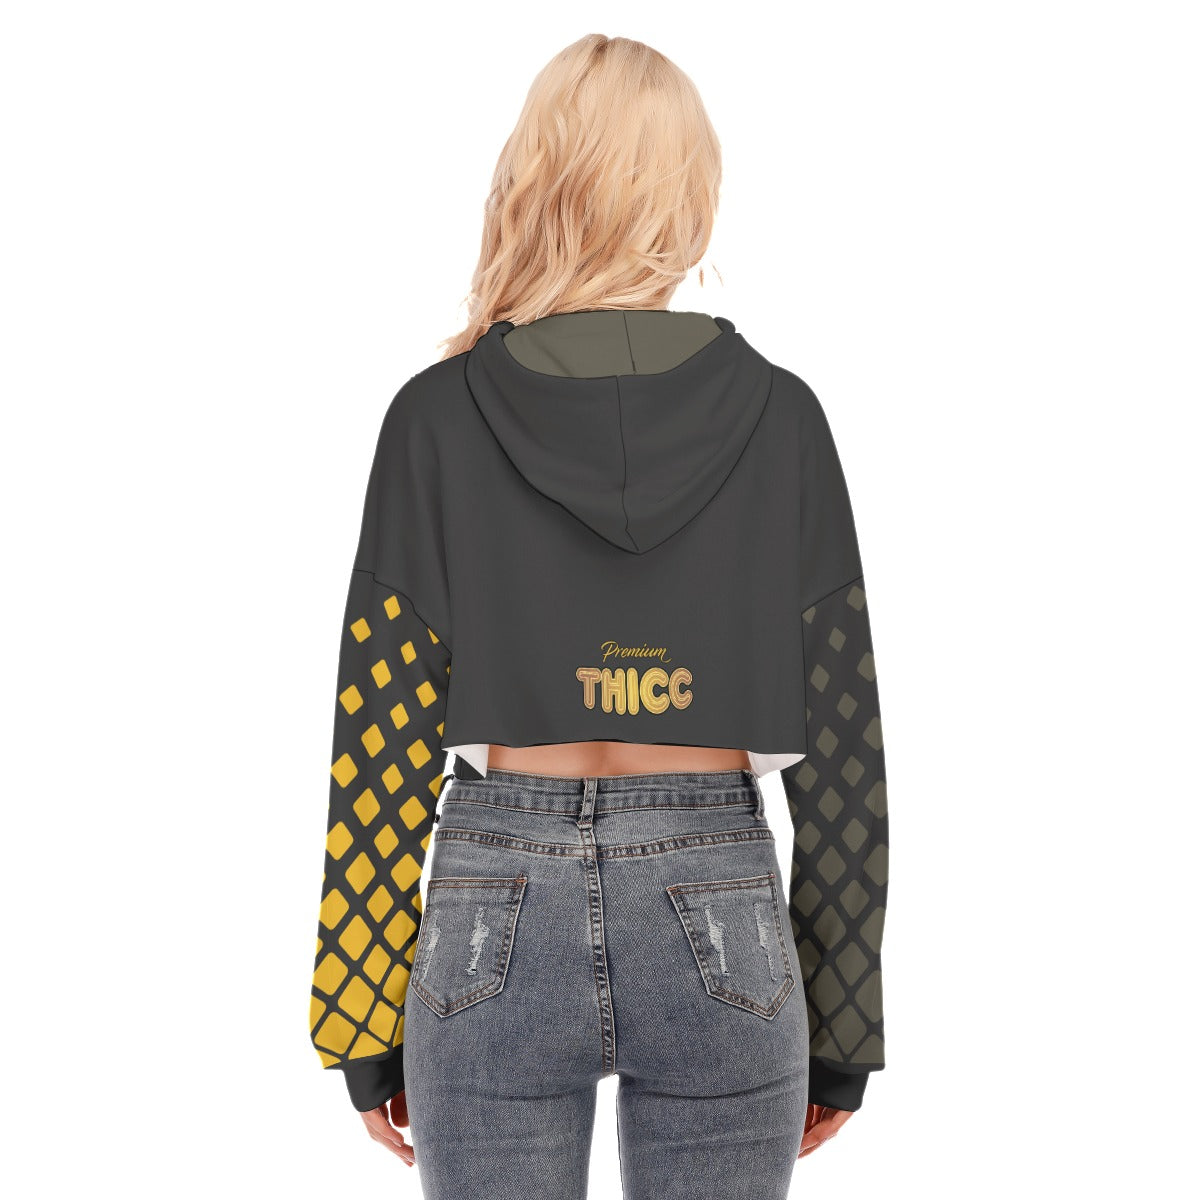 Royal Gold Premium Thicc Women's Cropped Hoodie With Zipper Closure